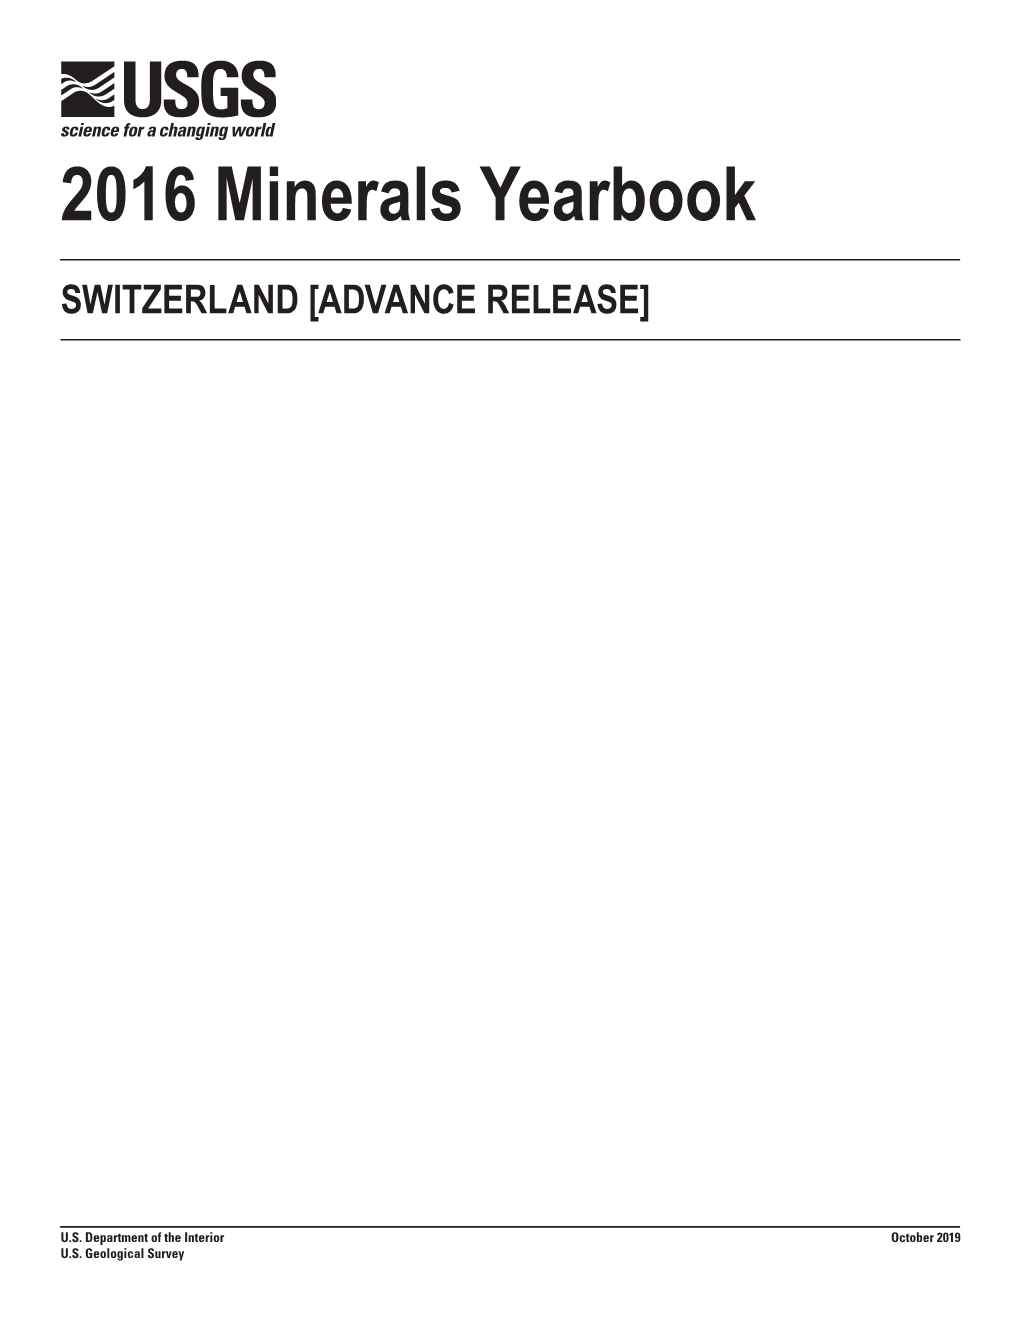 The Mineral Industry of Switzerland in 2016